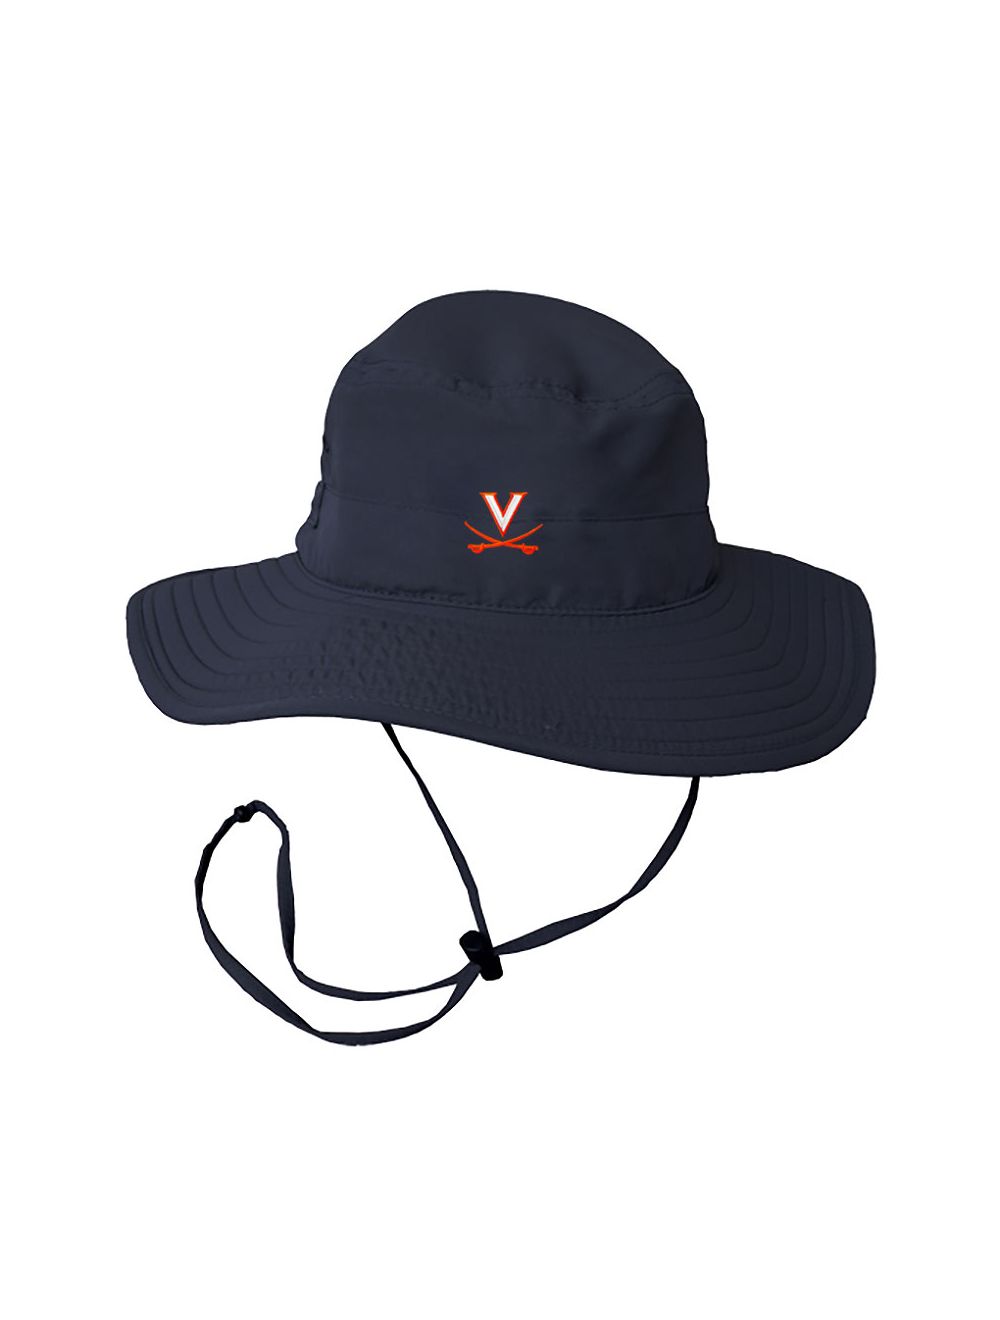 Cooling Bucket Hat for Performance, MISSION